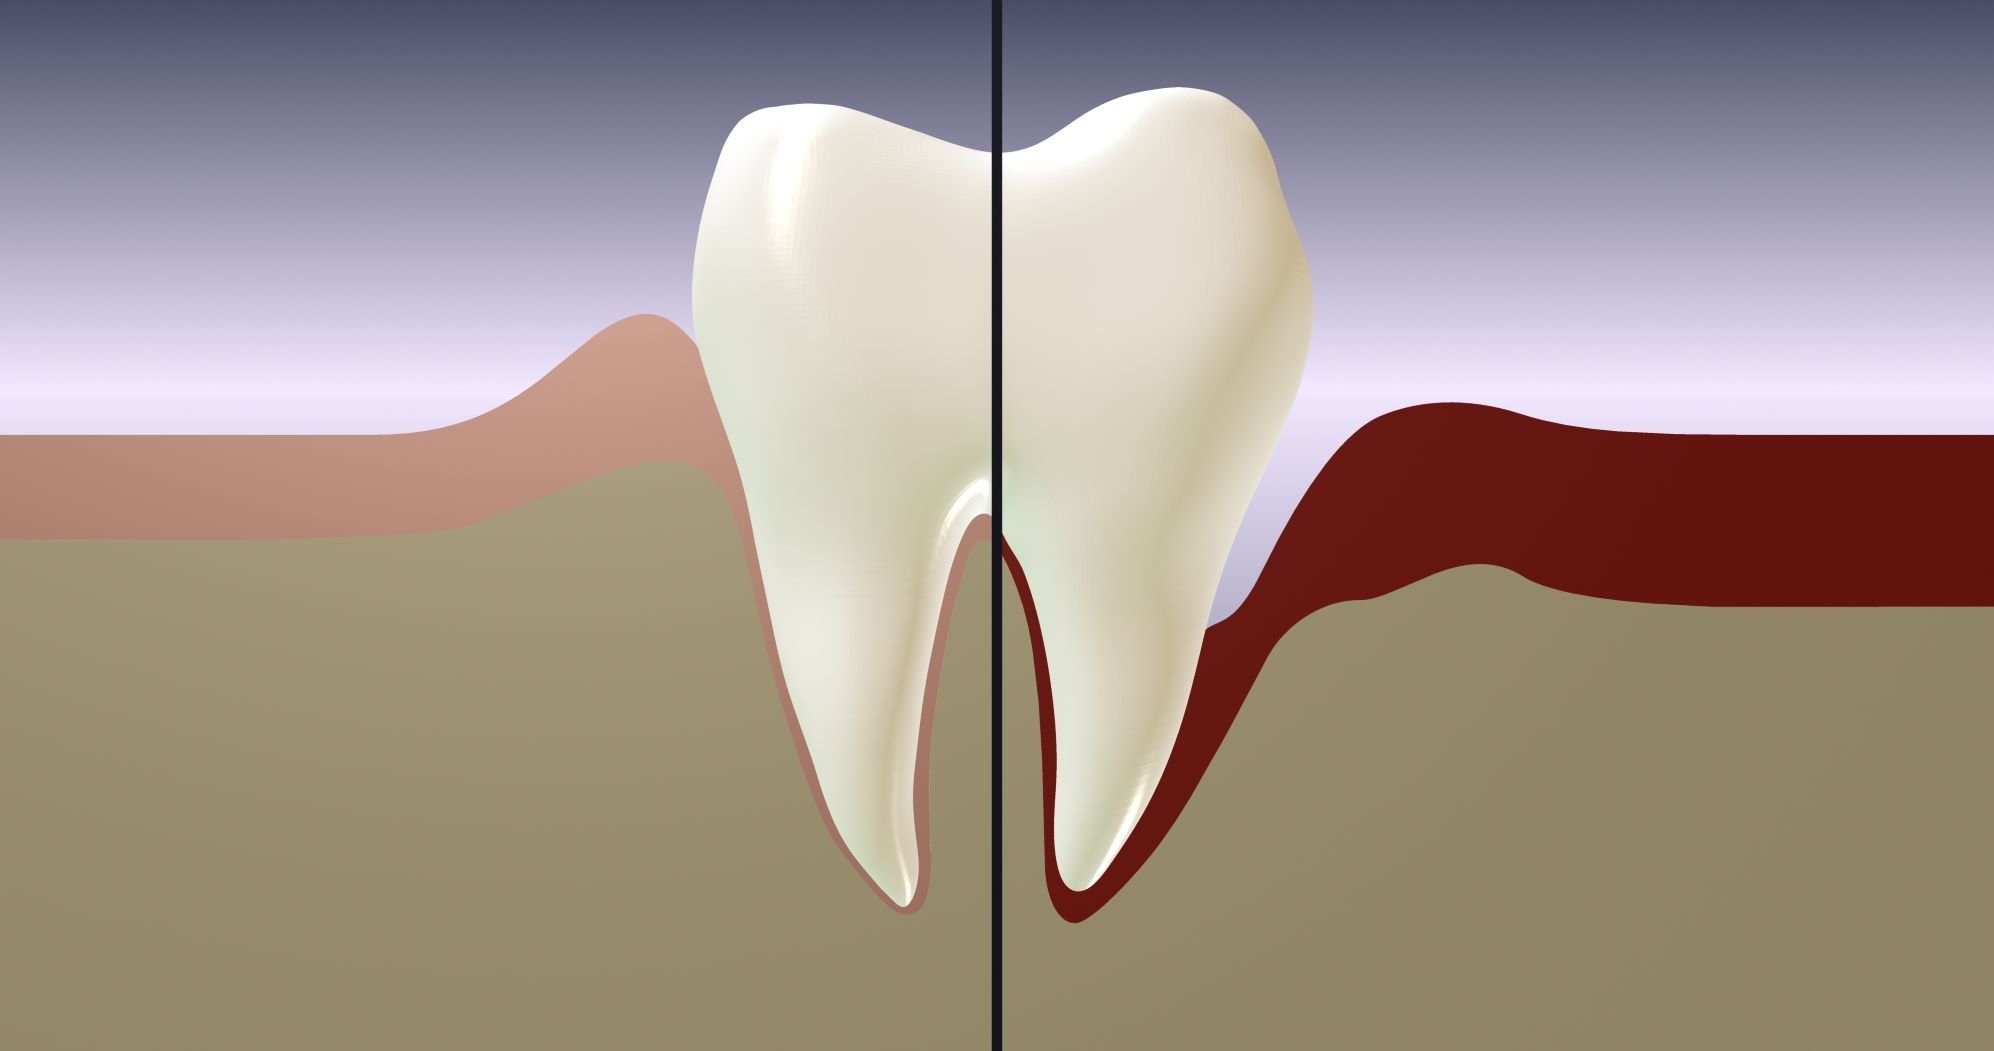 deep teeth cleaning may be needed to treat or maintain gum recession